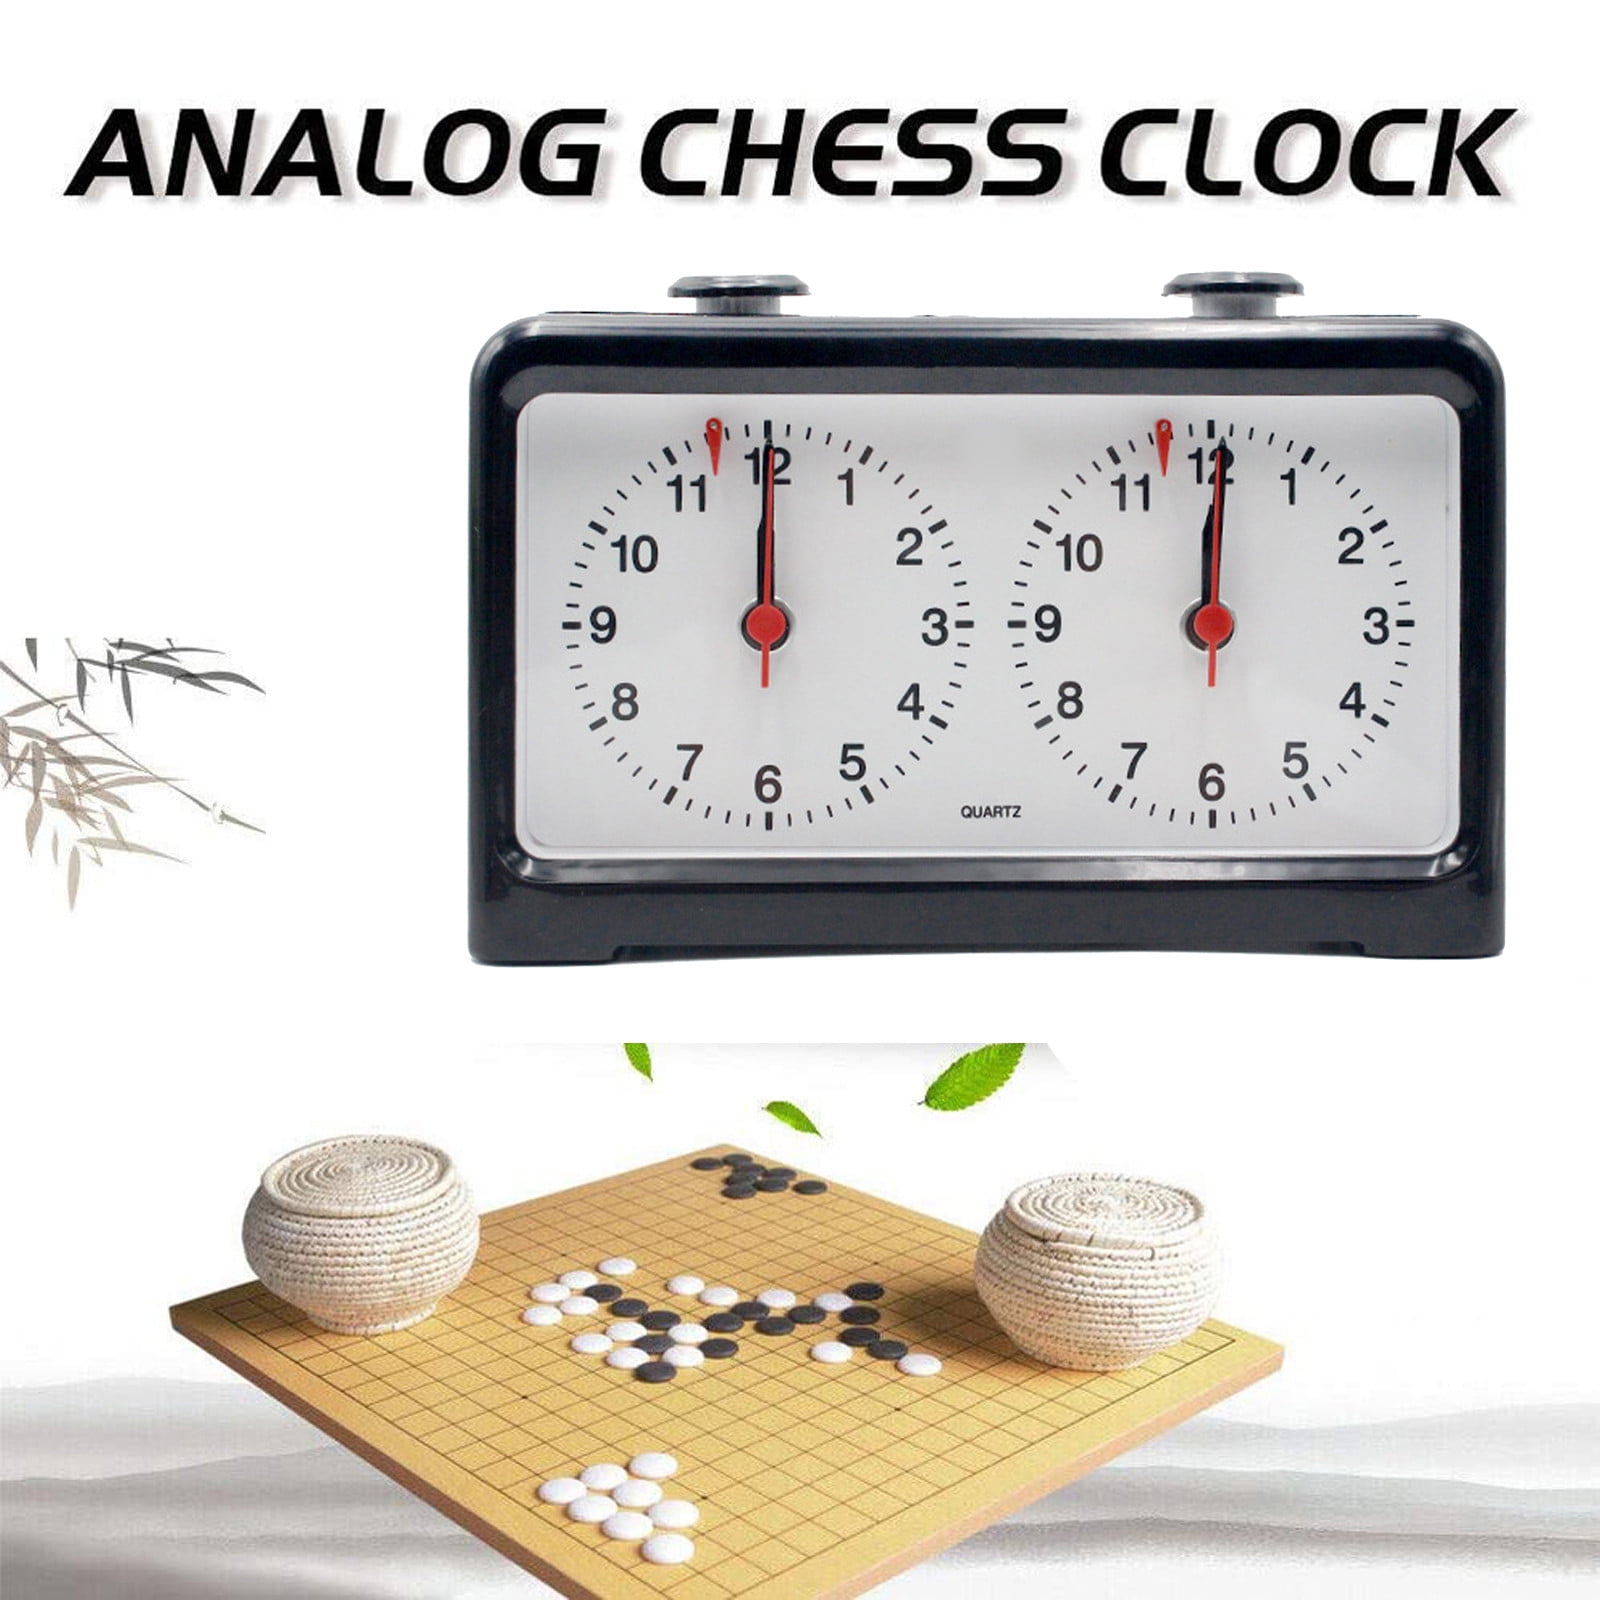 Quarz Analog Chess Clock I-go Count Up Down Timer for Game Competition Black 